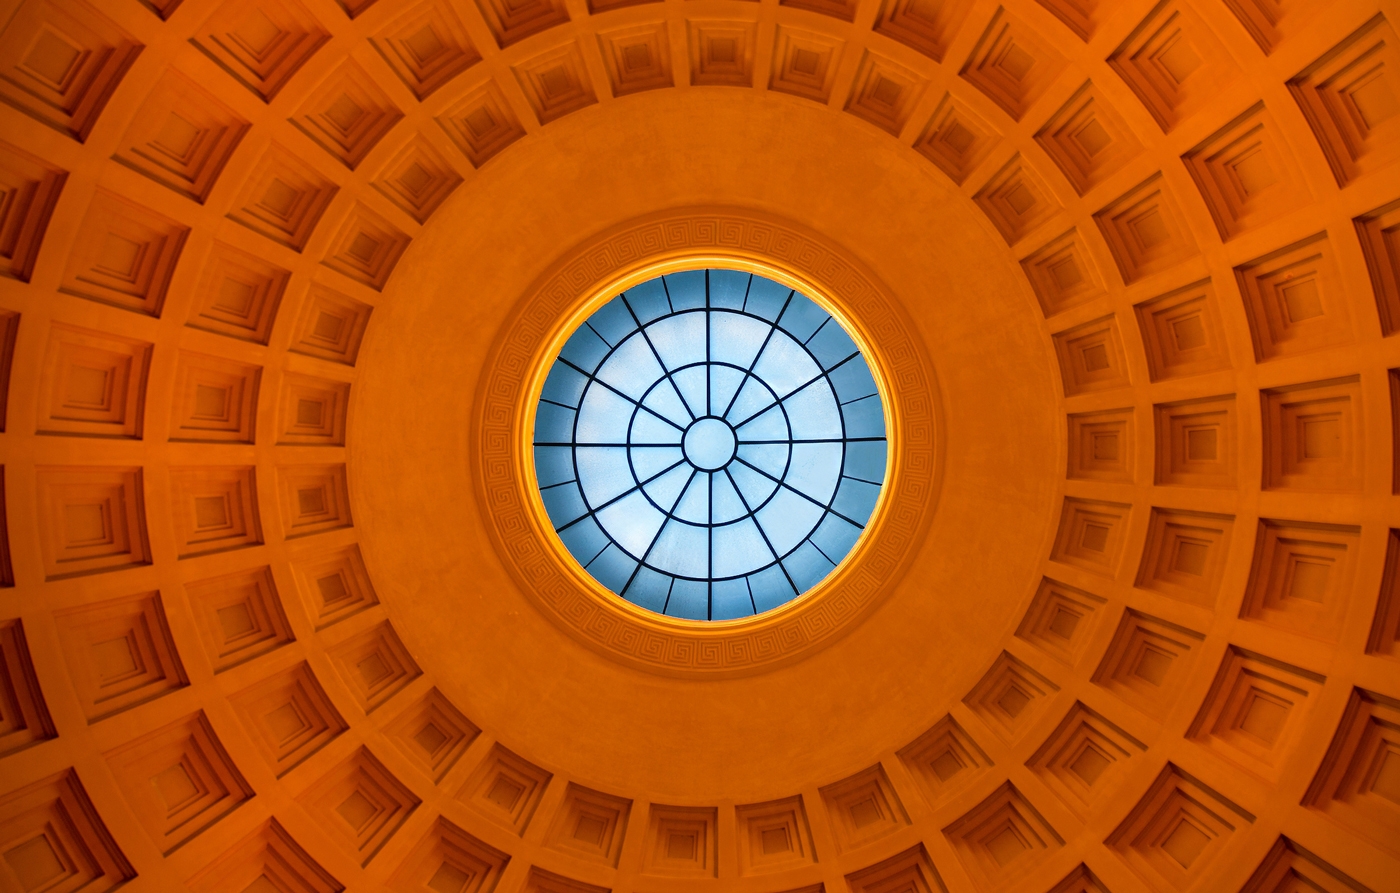 Museum Dome by Ian Veitzer